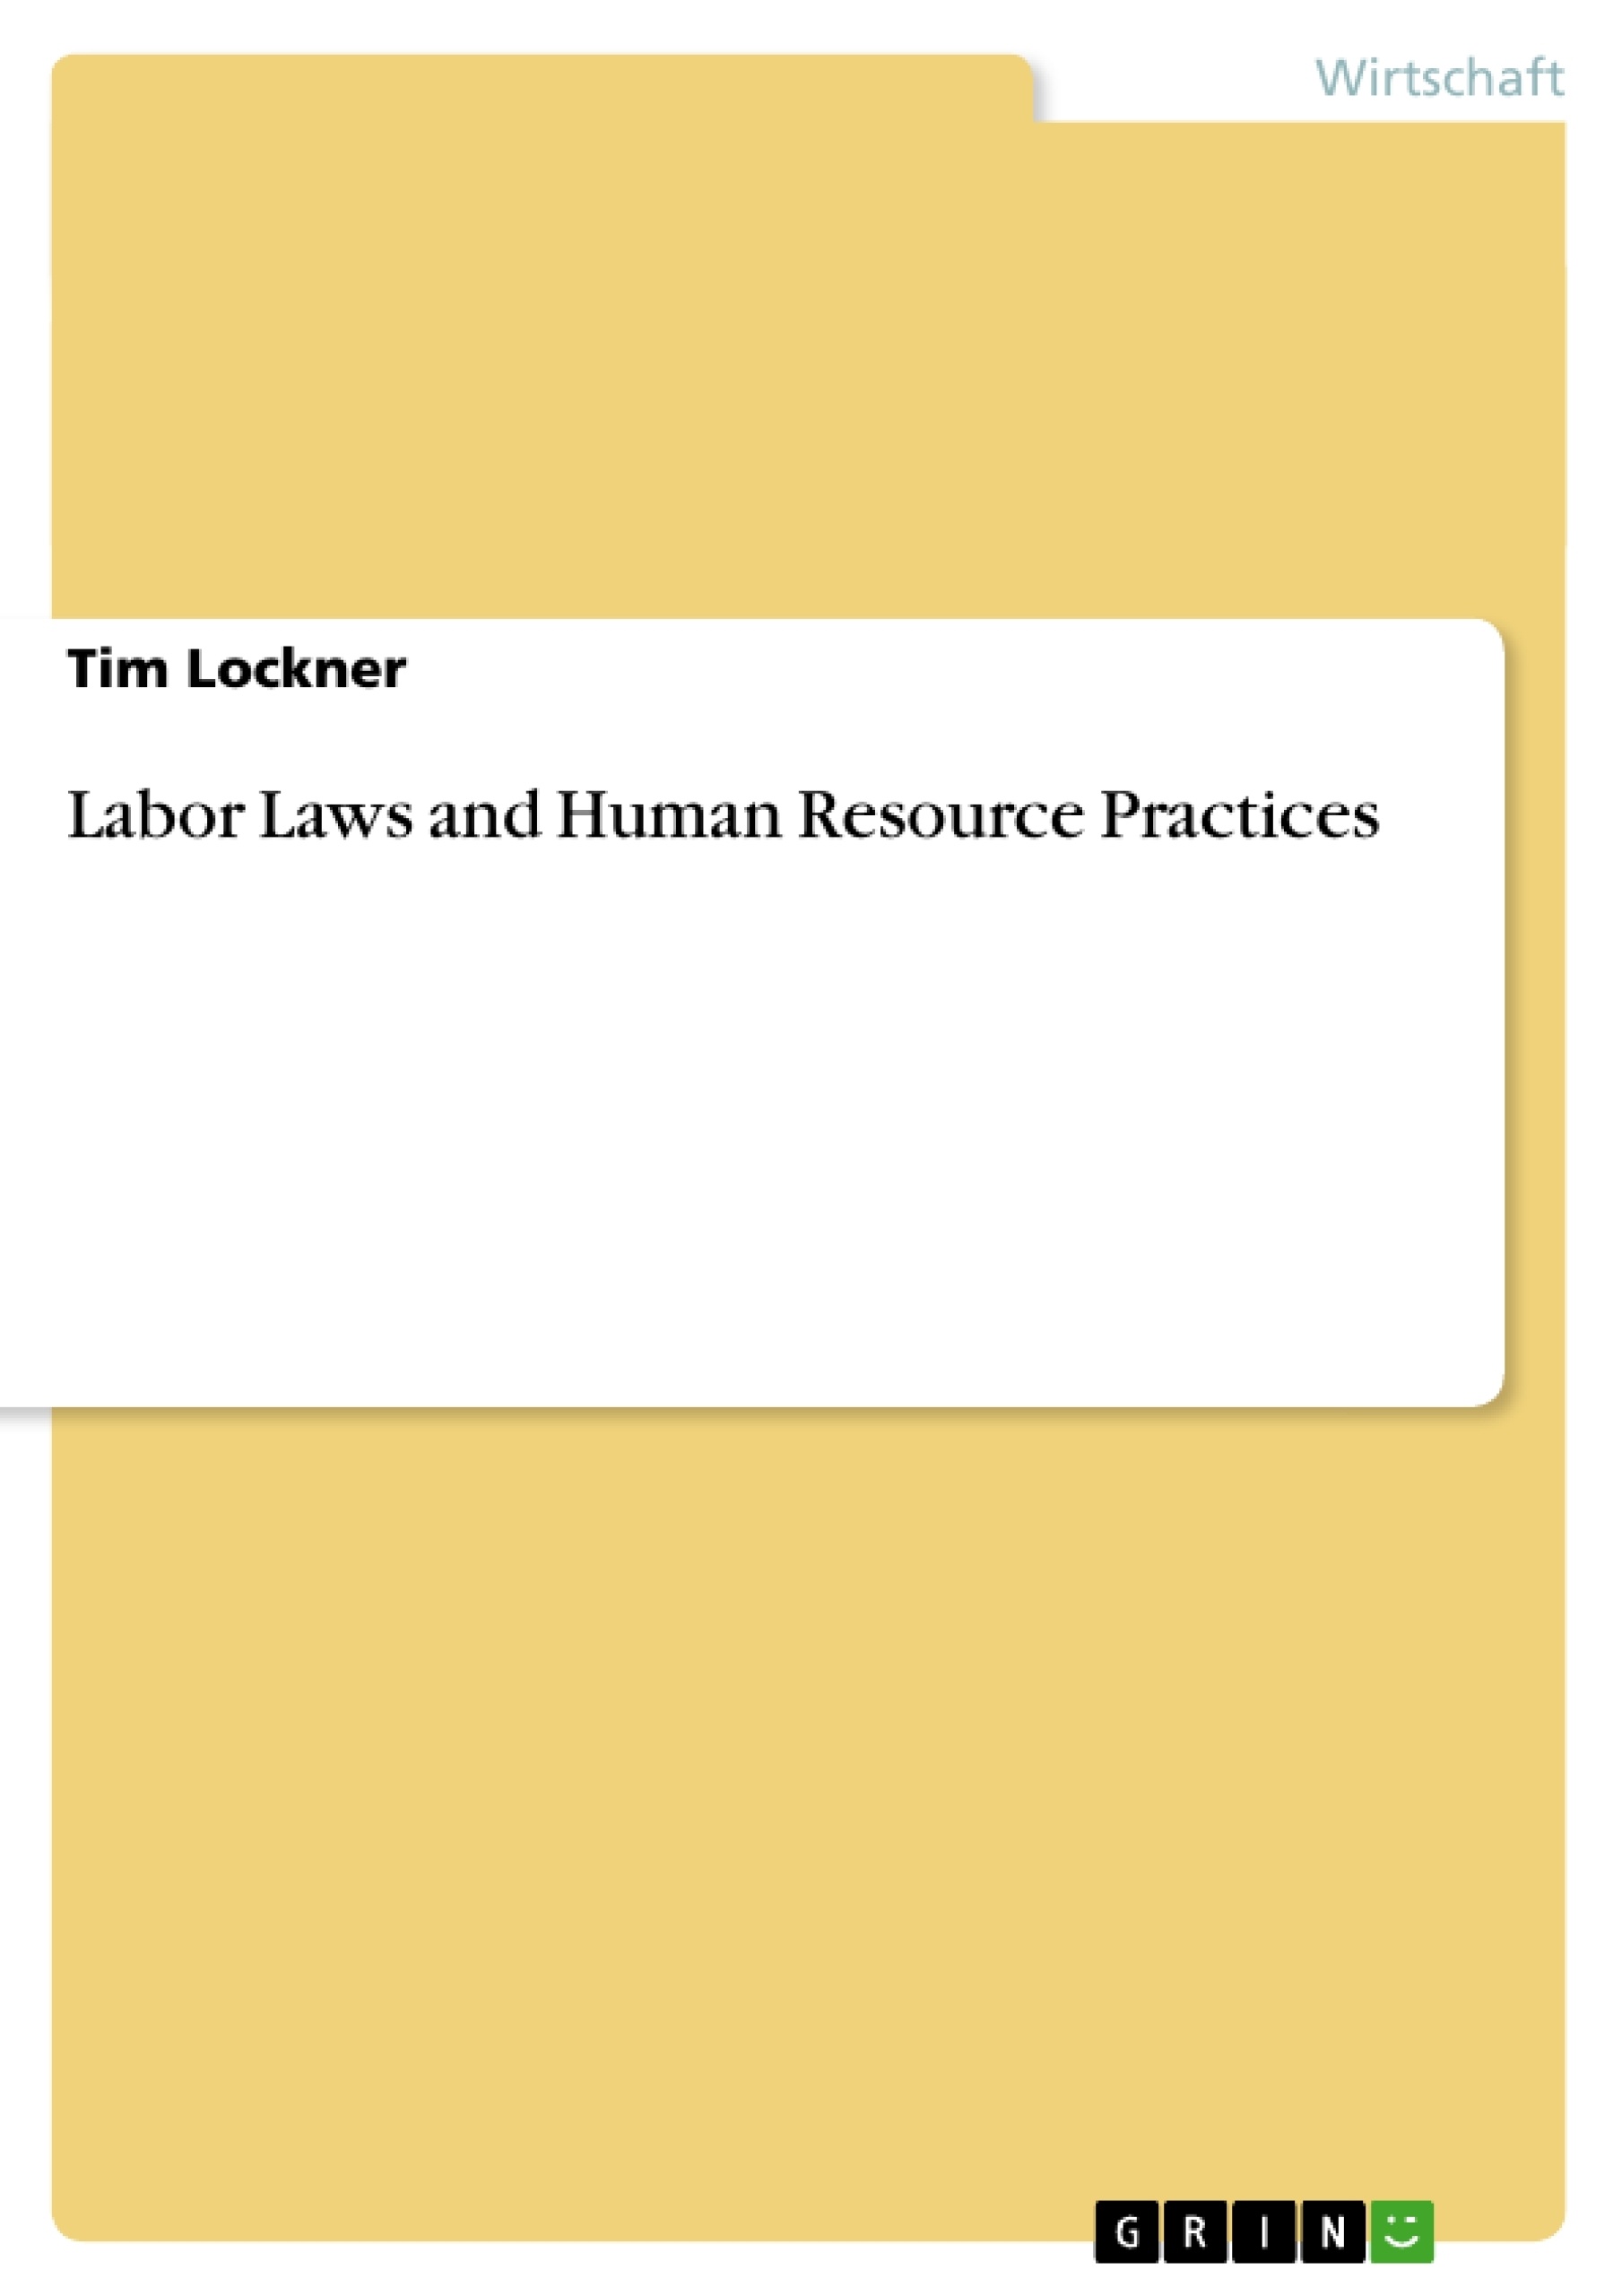 Title: Labor Laws and Human Resource Practices